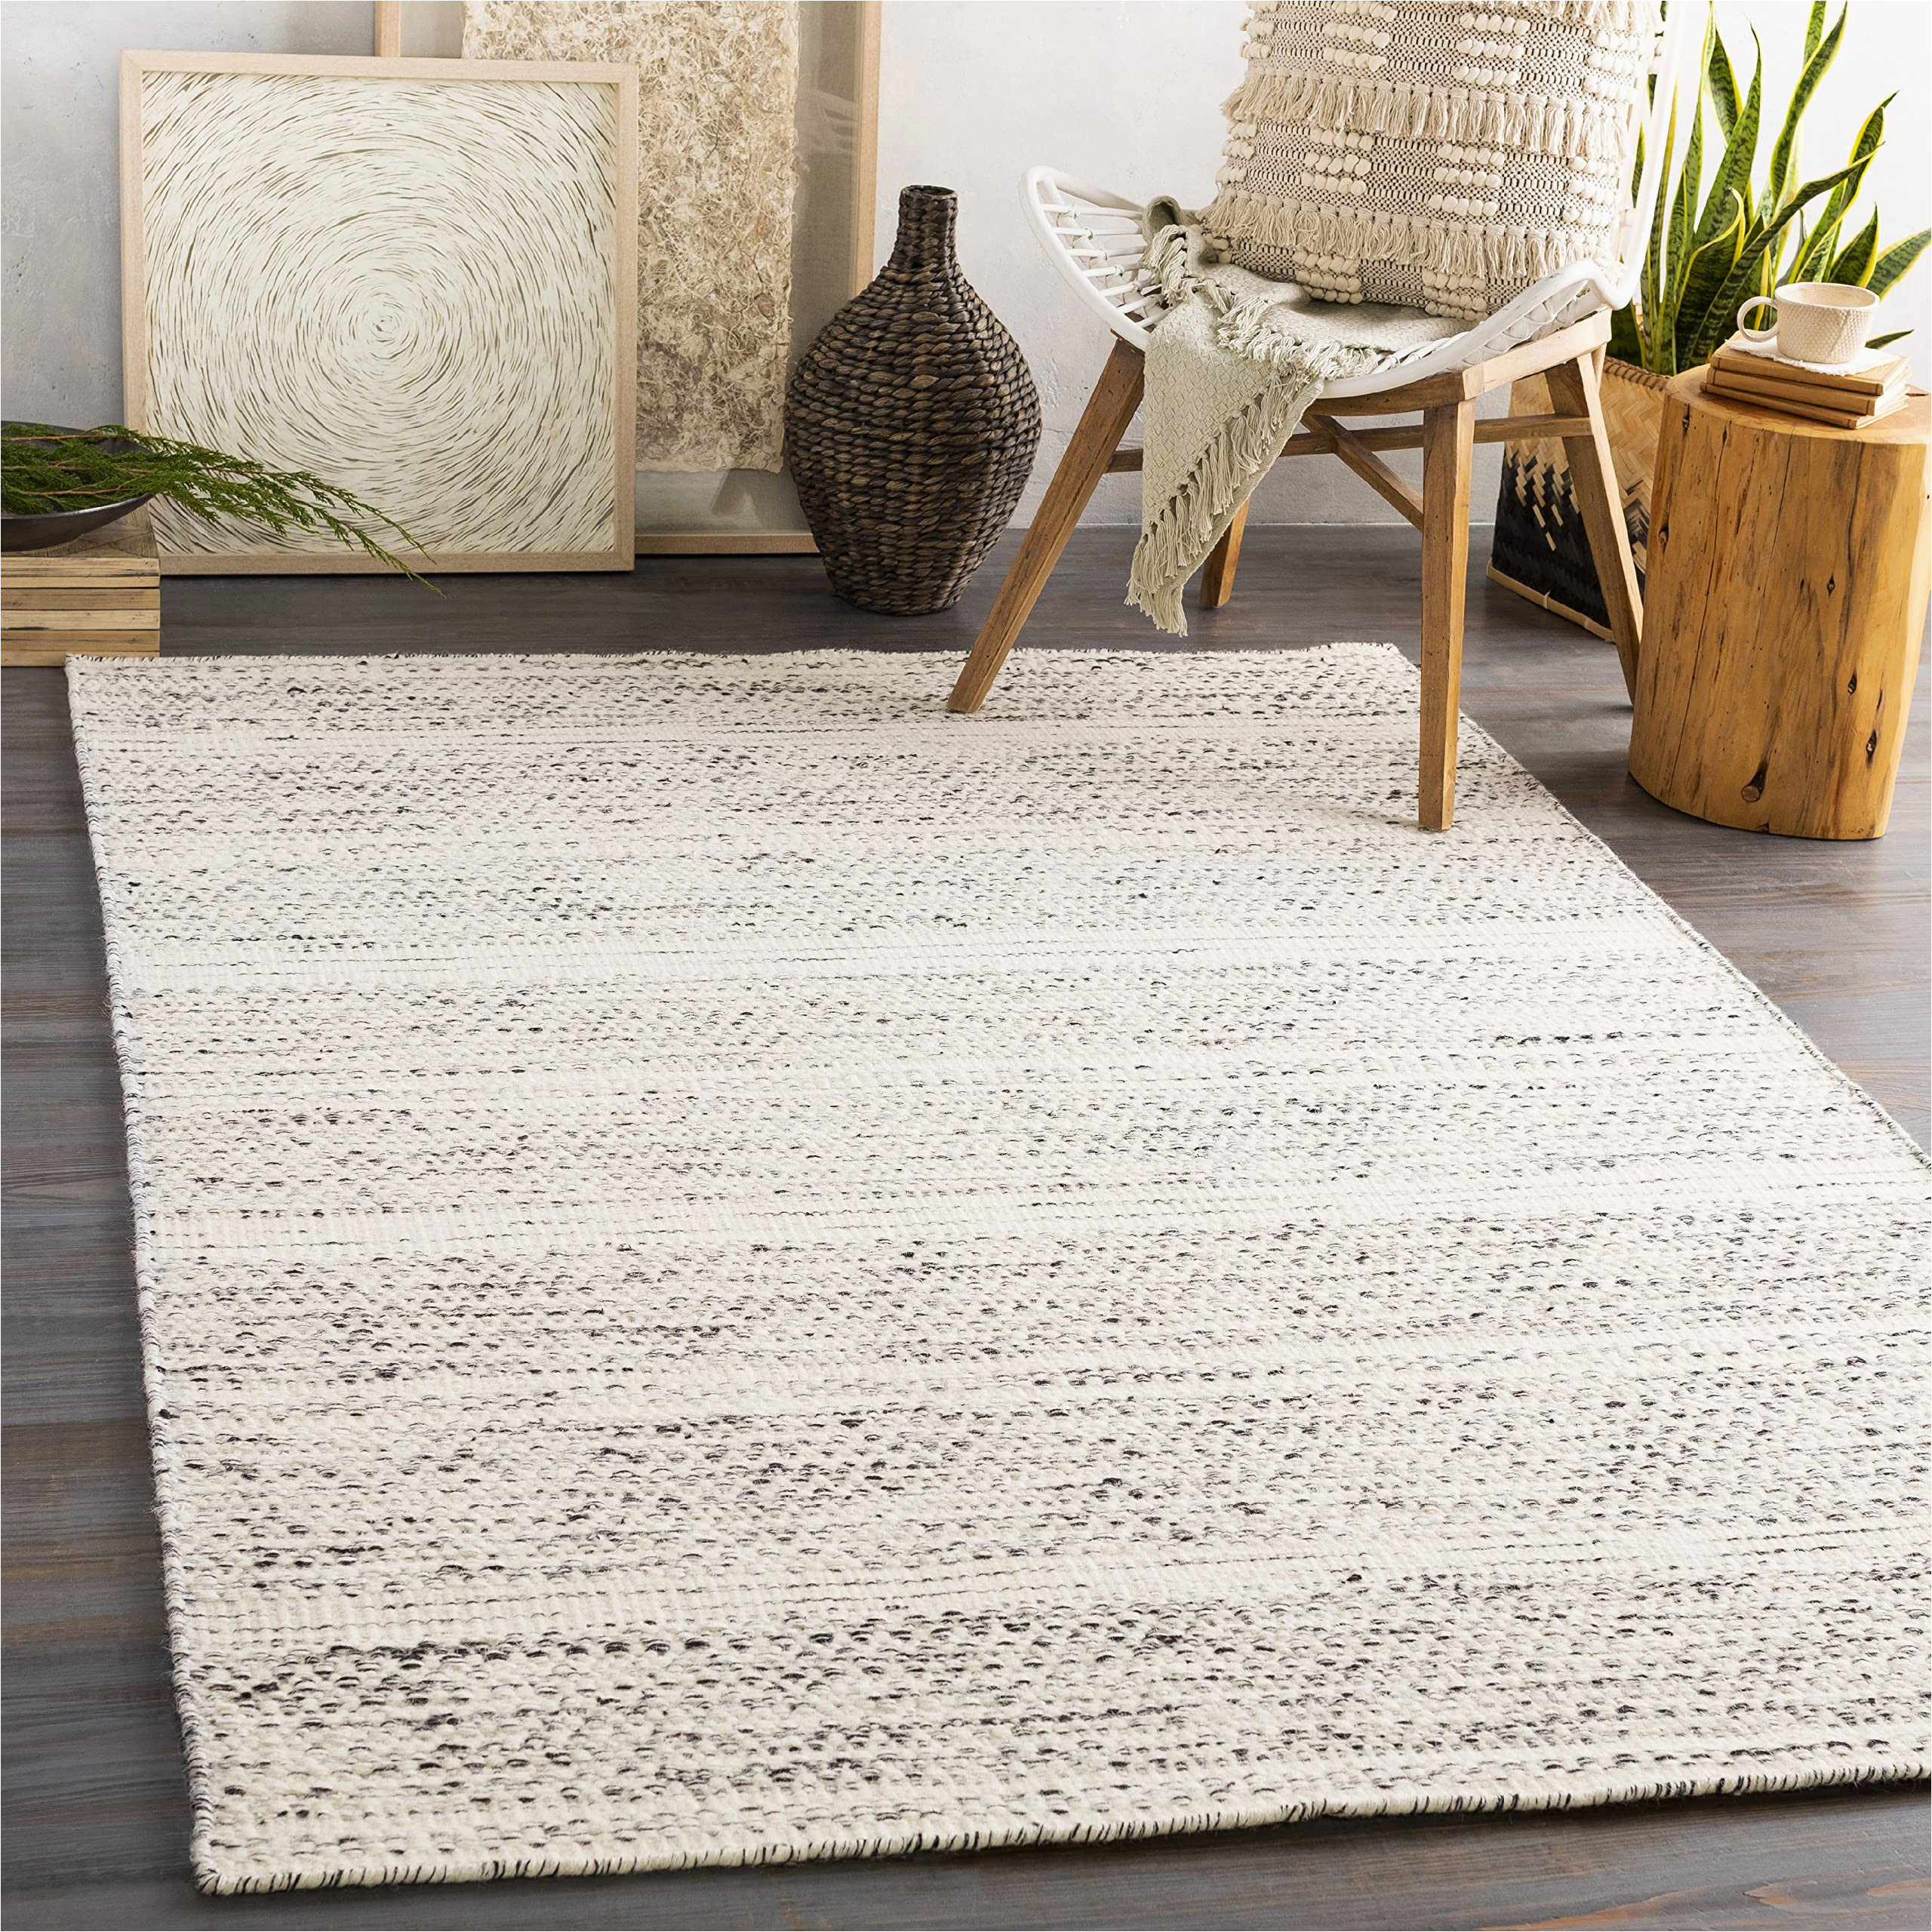 Amazon area Rugs 10 X 14 Mark&day area Rugs, 10×14 Marie Modern Cream area Rug, White / Blue / Black Carpet for Living Room, Bedroom or Kitchen (10′ X 14′)